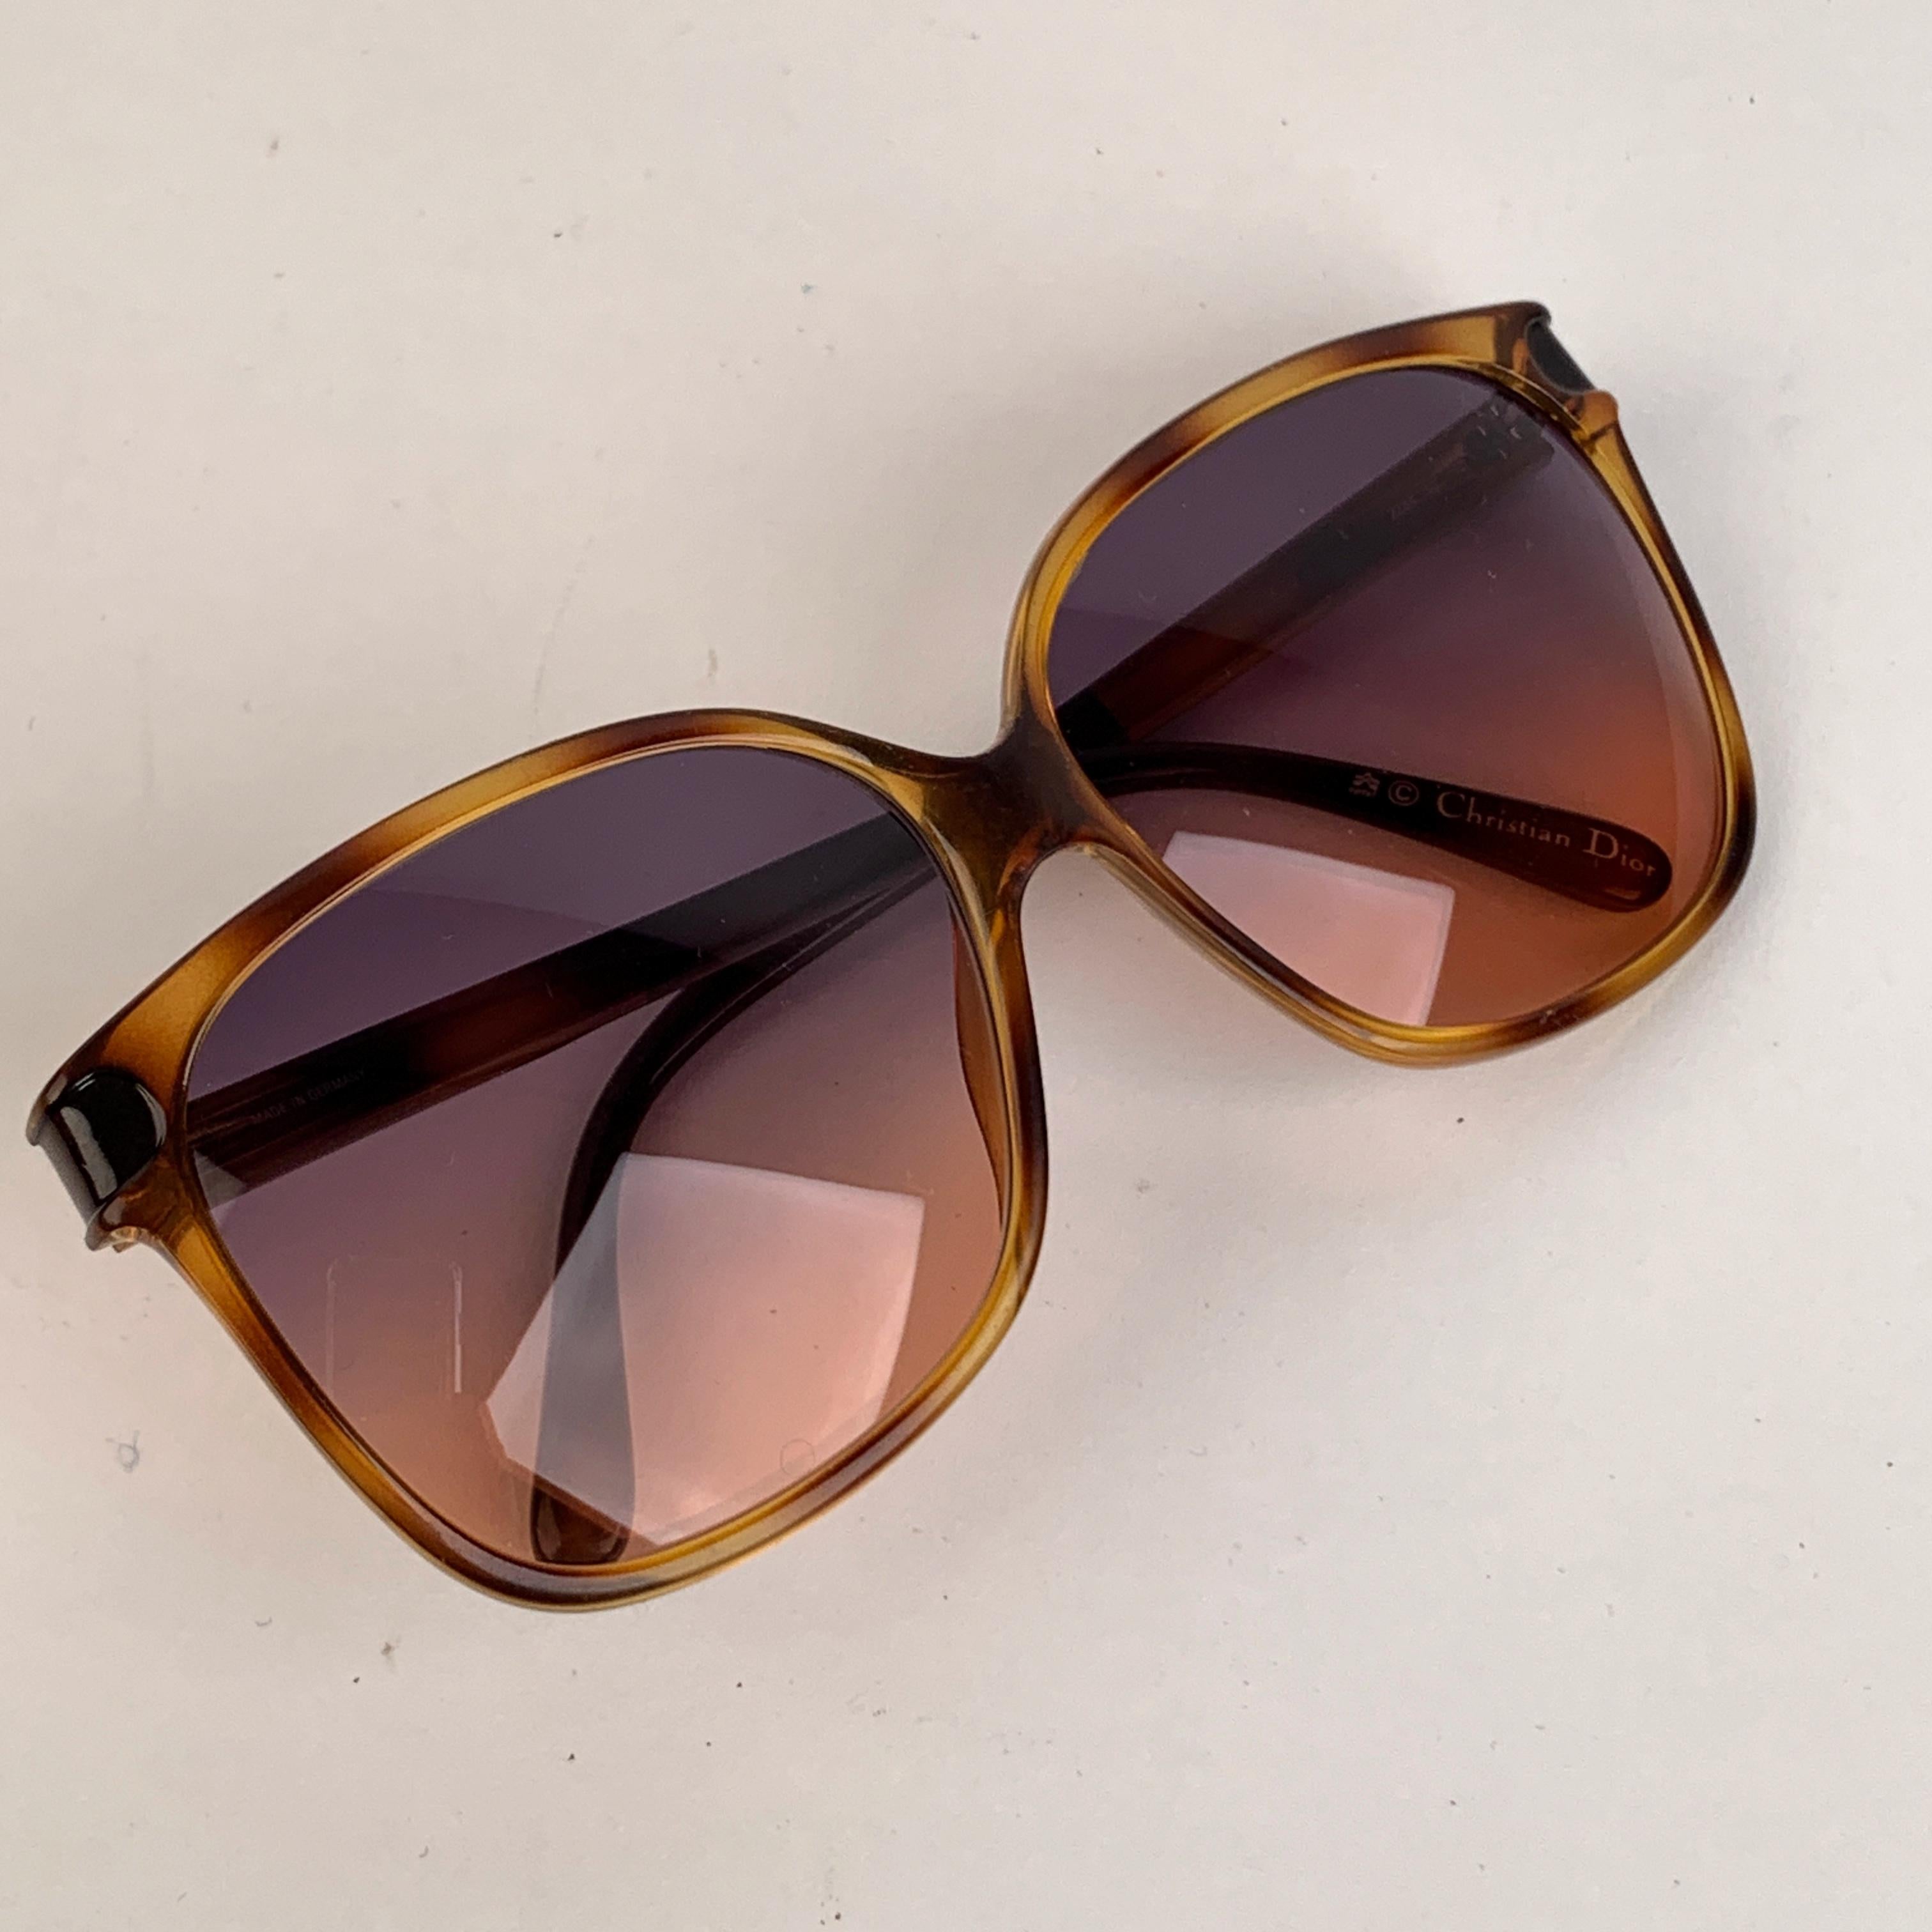 CHRISTIAN DIOR Vintage brown camouflage / tortoise effect frame. Optyl handmade in Germany. New 100% UV Bicolor /gray & brown) Gradient Lenses. Mod: 2284 - 10. Very rare find. Details MATERIAL: Optyl COLOR: Brown MODEL: 2284 GENDER: Unisex SIZE: